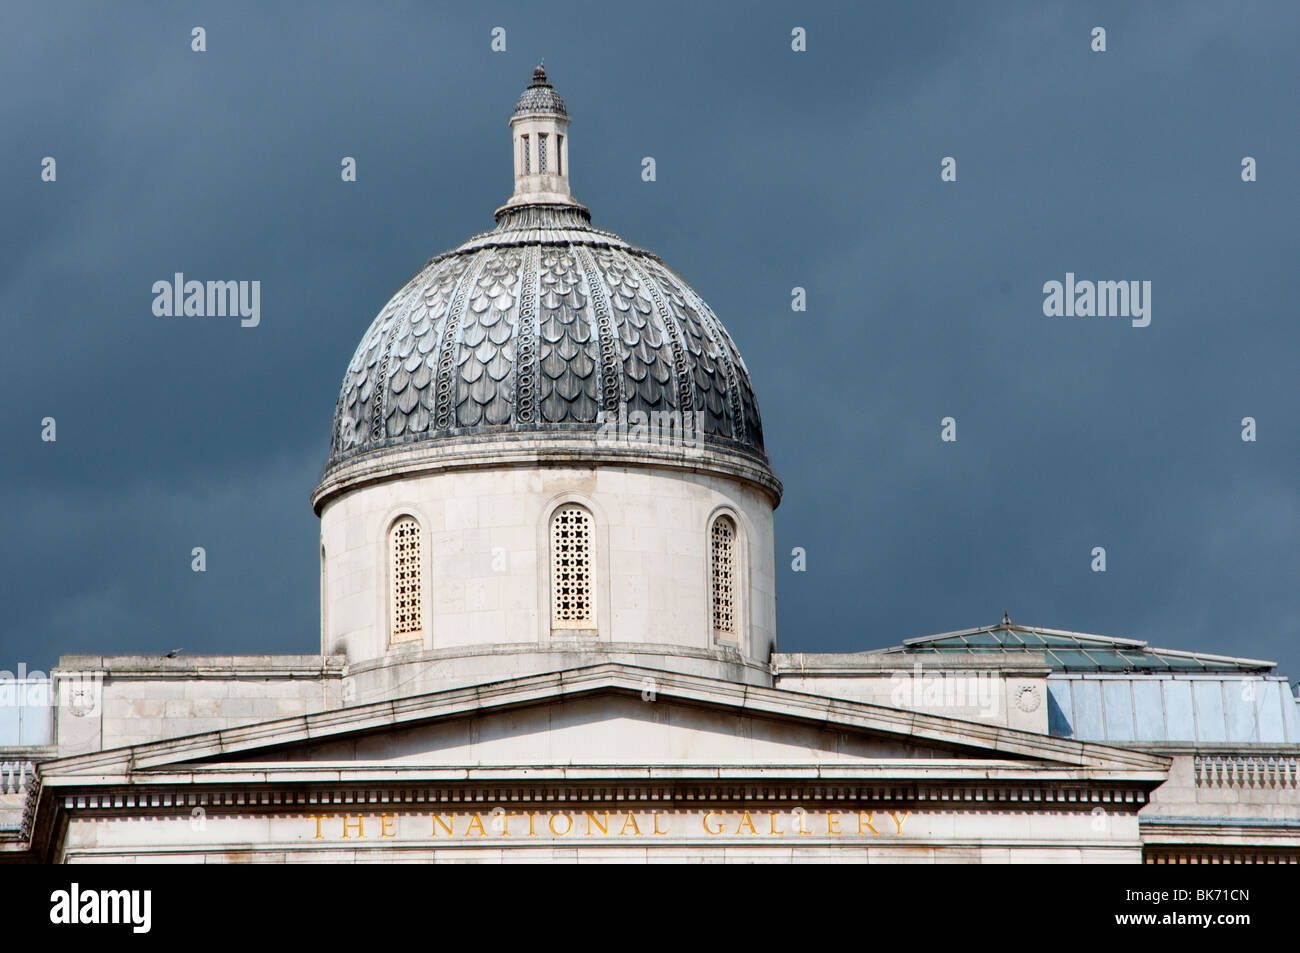 National Gallery dome Stock Photo